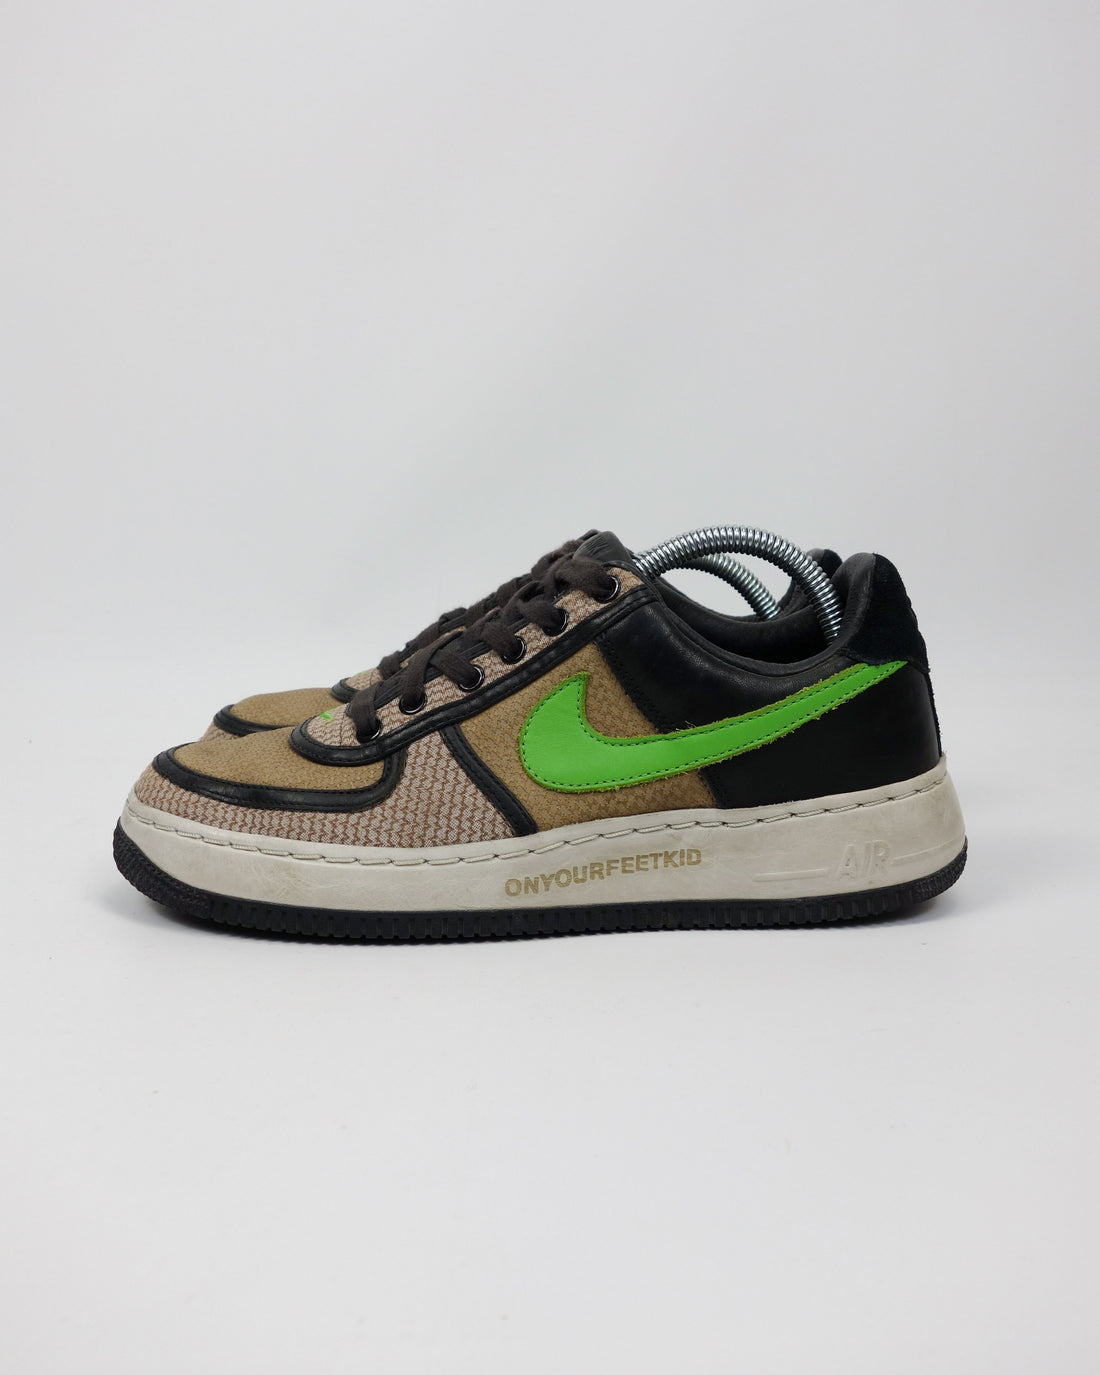 Nike Air Force 1 Low x UNDEFEATED "Insideout Priority" 2006